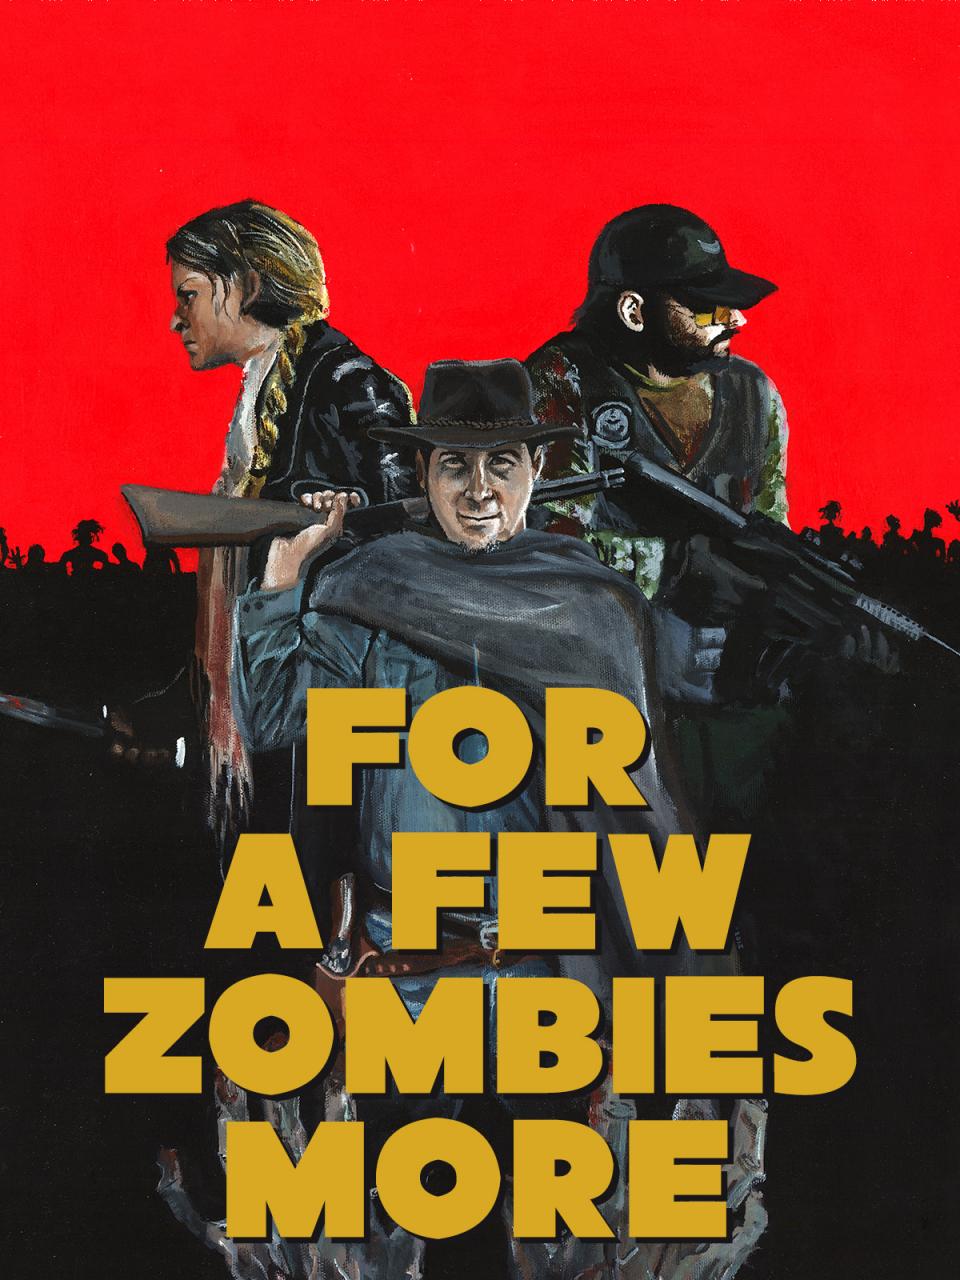 For A Few Zombies More